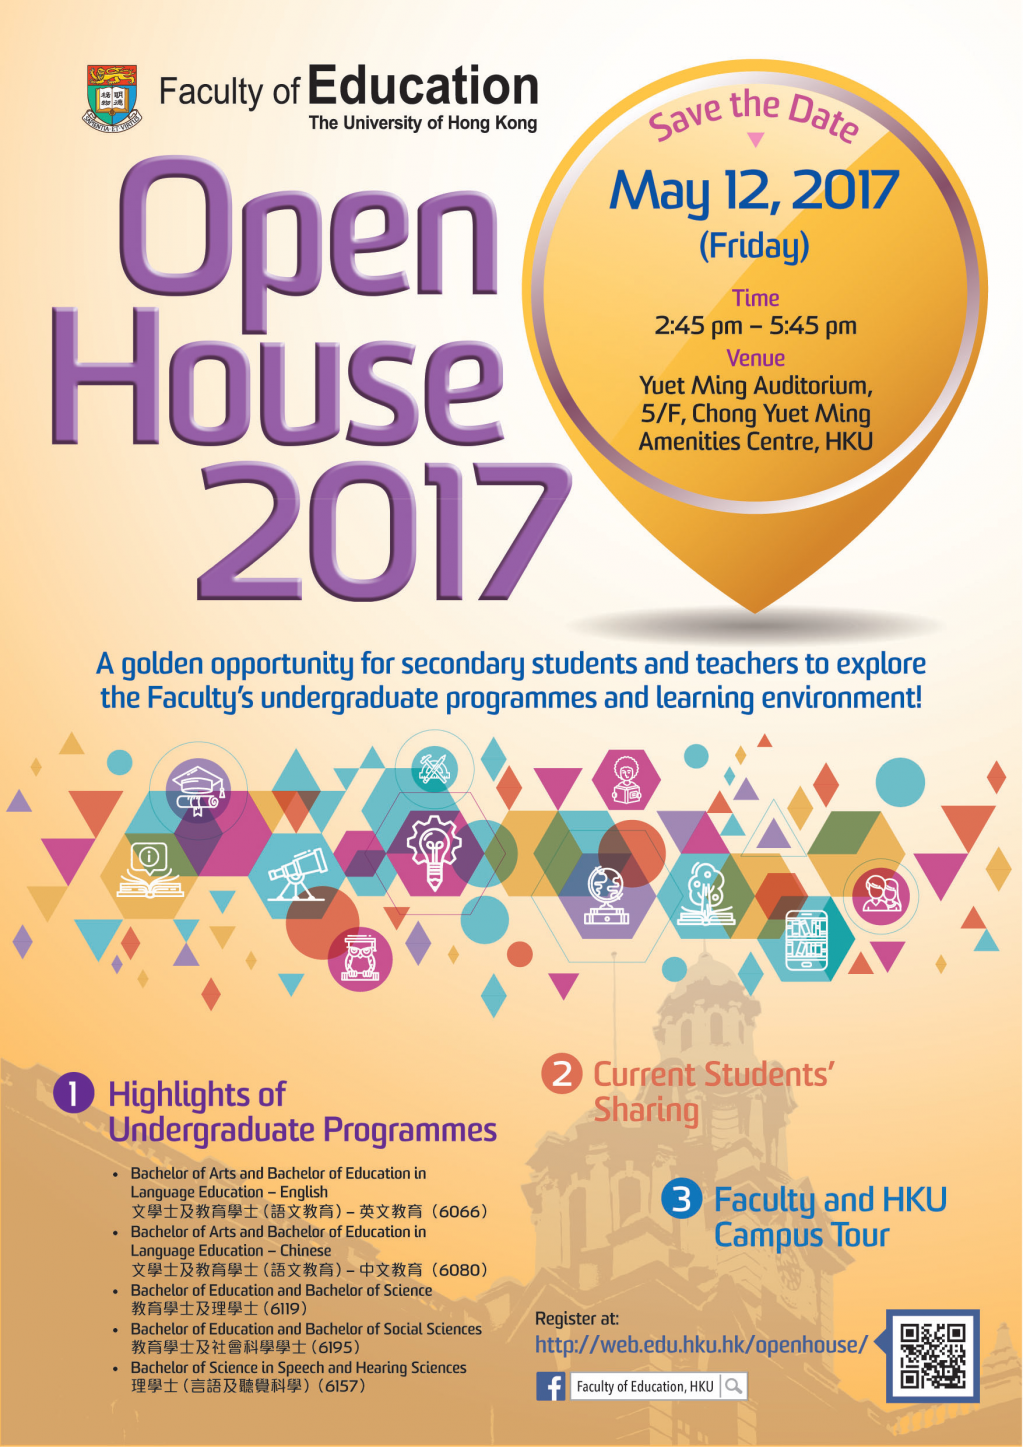 Faculty of Education - Open House 2017